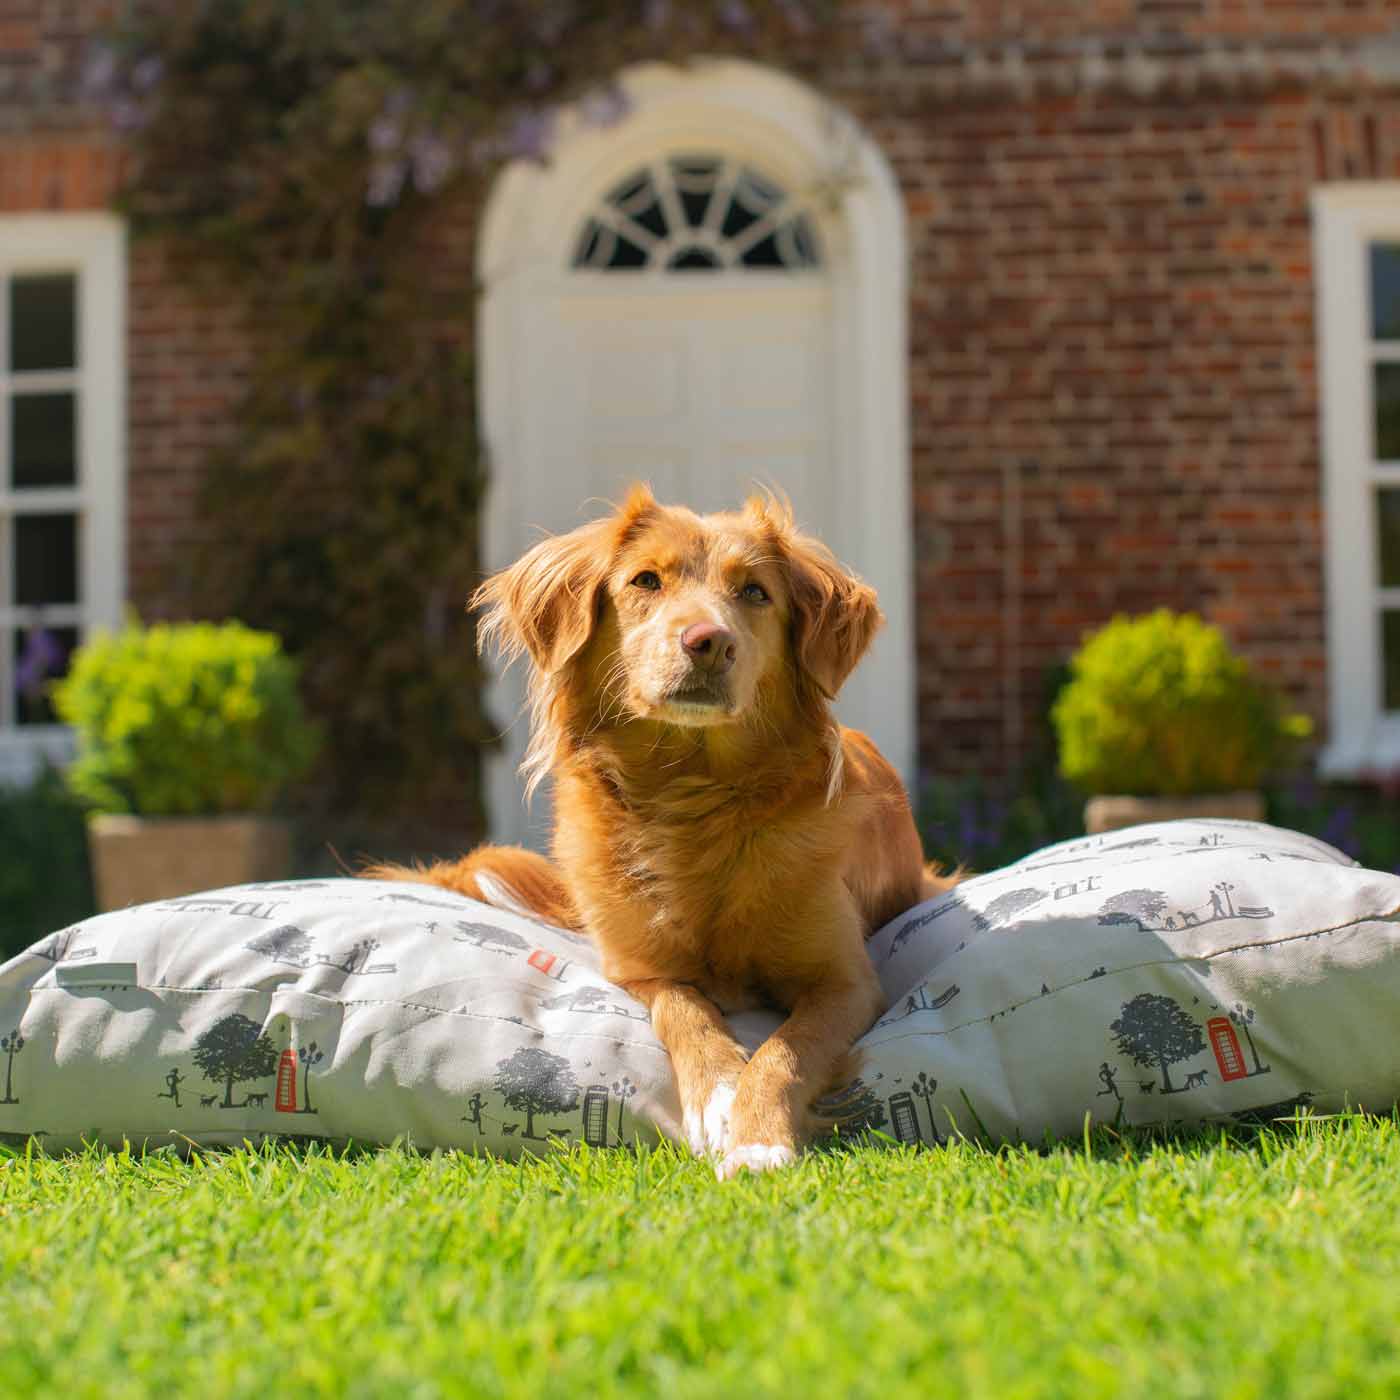 Luxury Sleepeeze Dog Cushion in Hyde Park, The Perfect Pet Bed Time Accessory! Available Now at Lords & Labradors